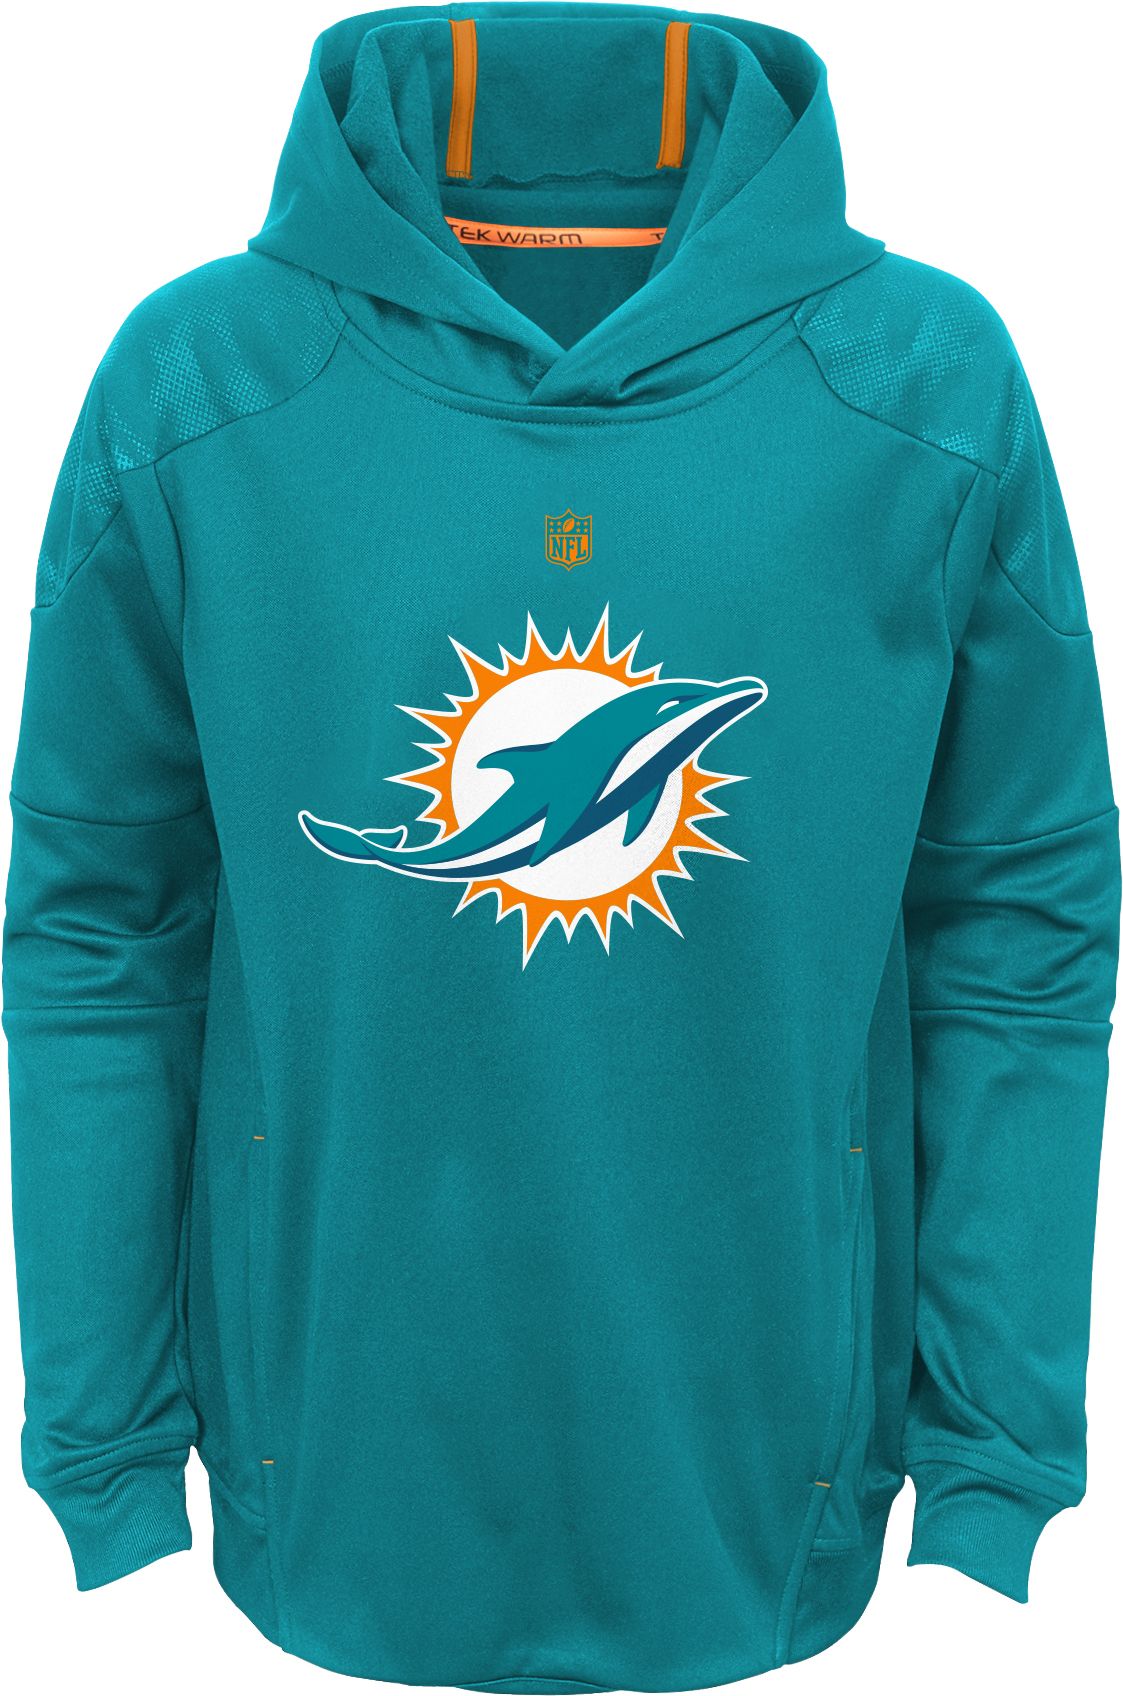 Miami Dolphins Apparel & Gear | DICK'S Sporting Goods